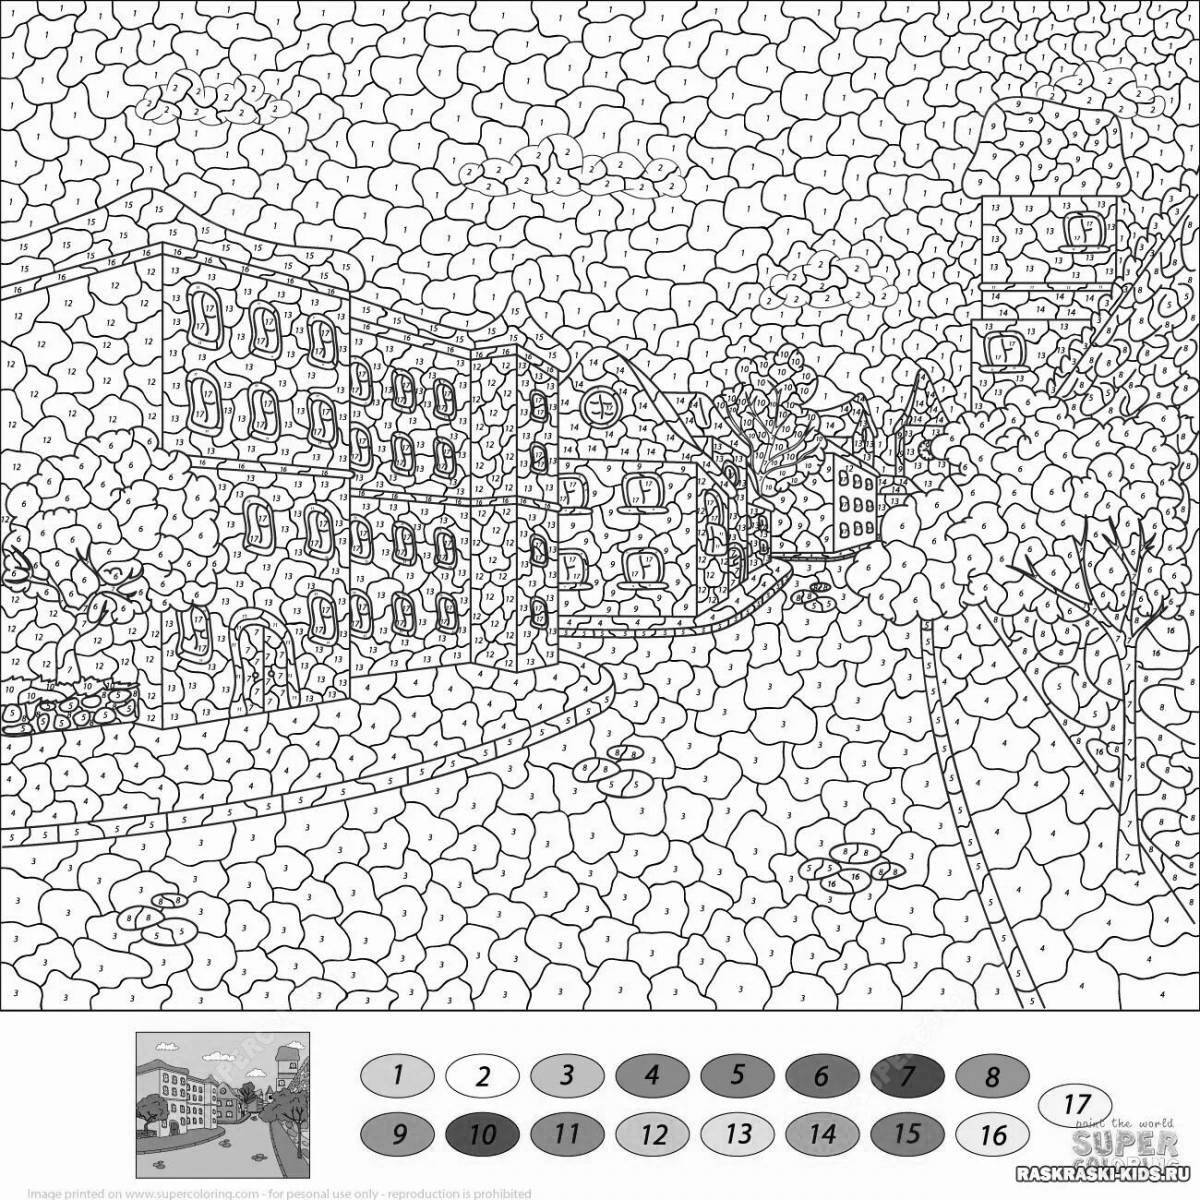 Attractive coloring game by numbers in contact